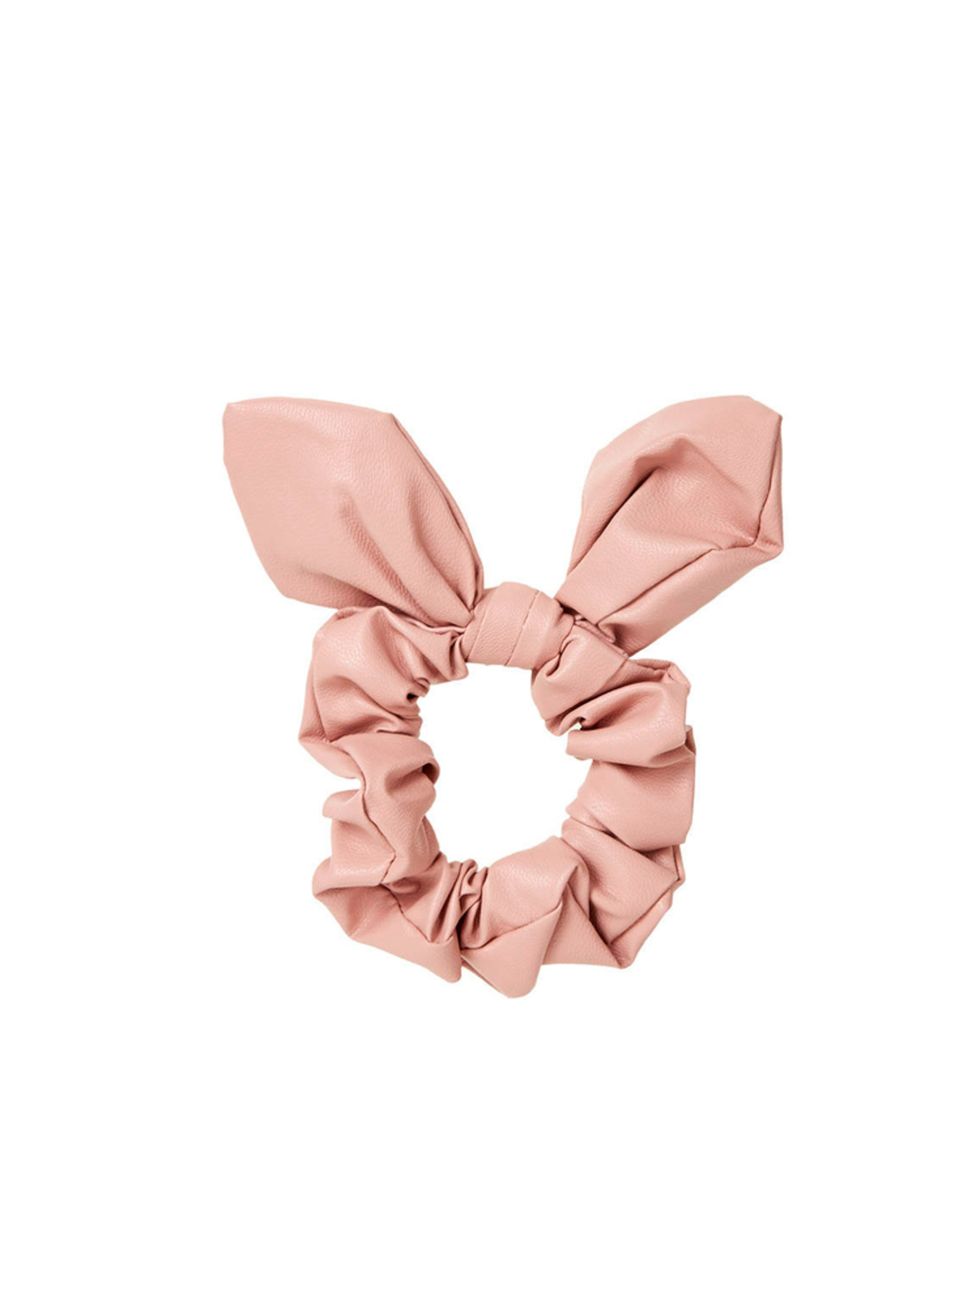 <p>Because bows always make us happy.</p>

<p><a href="http://www.topshop.com/webapp/wcs/stores/servlet/ProductDisplay?searchTerm=scrunchie&storeId=12556&productId=17016551&urlRequestType=Base&categoryId=&langId=-1&productIdentifier=product&catalogId=3305